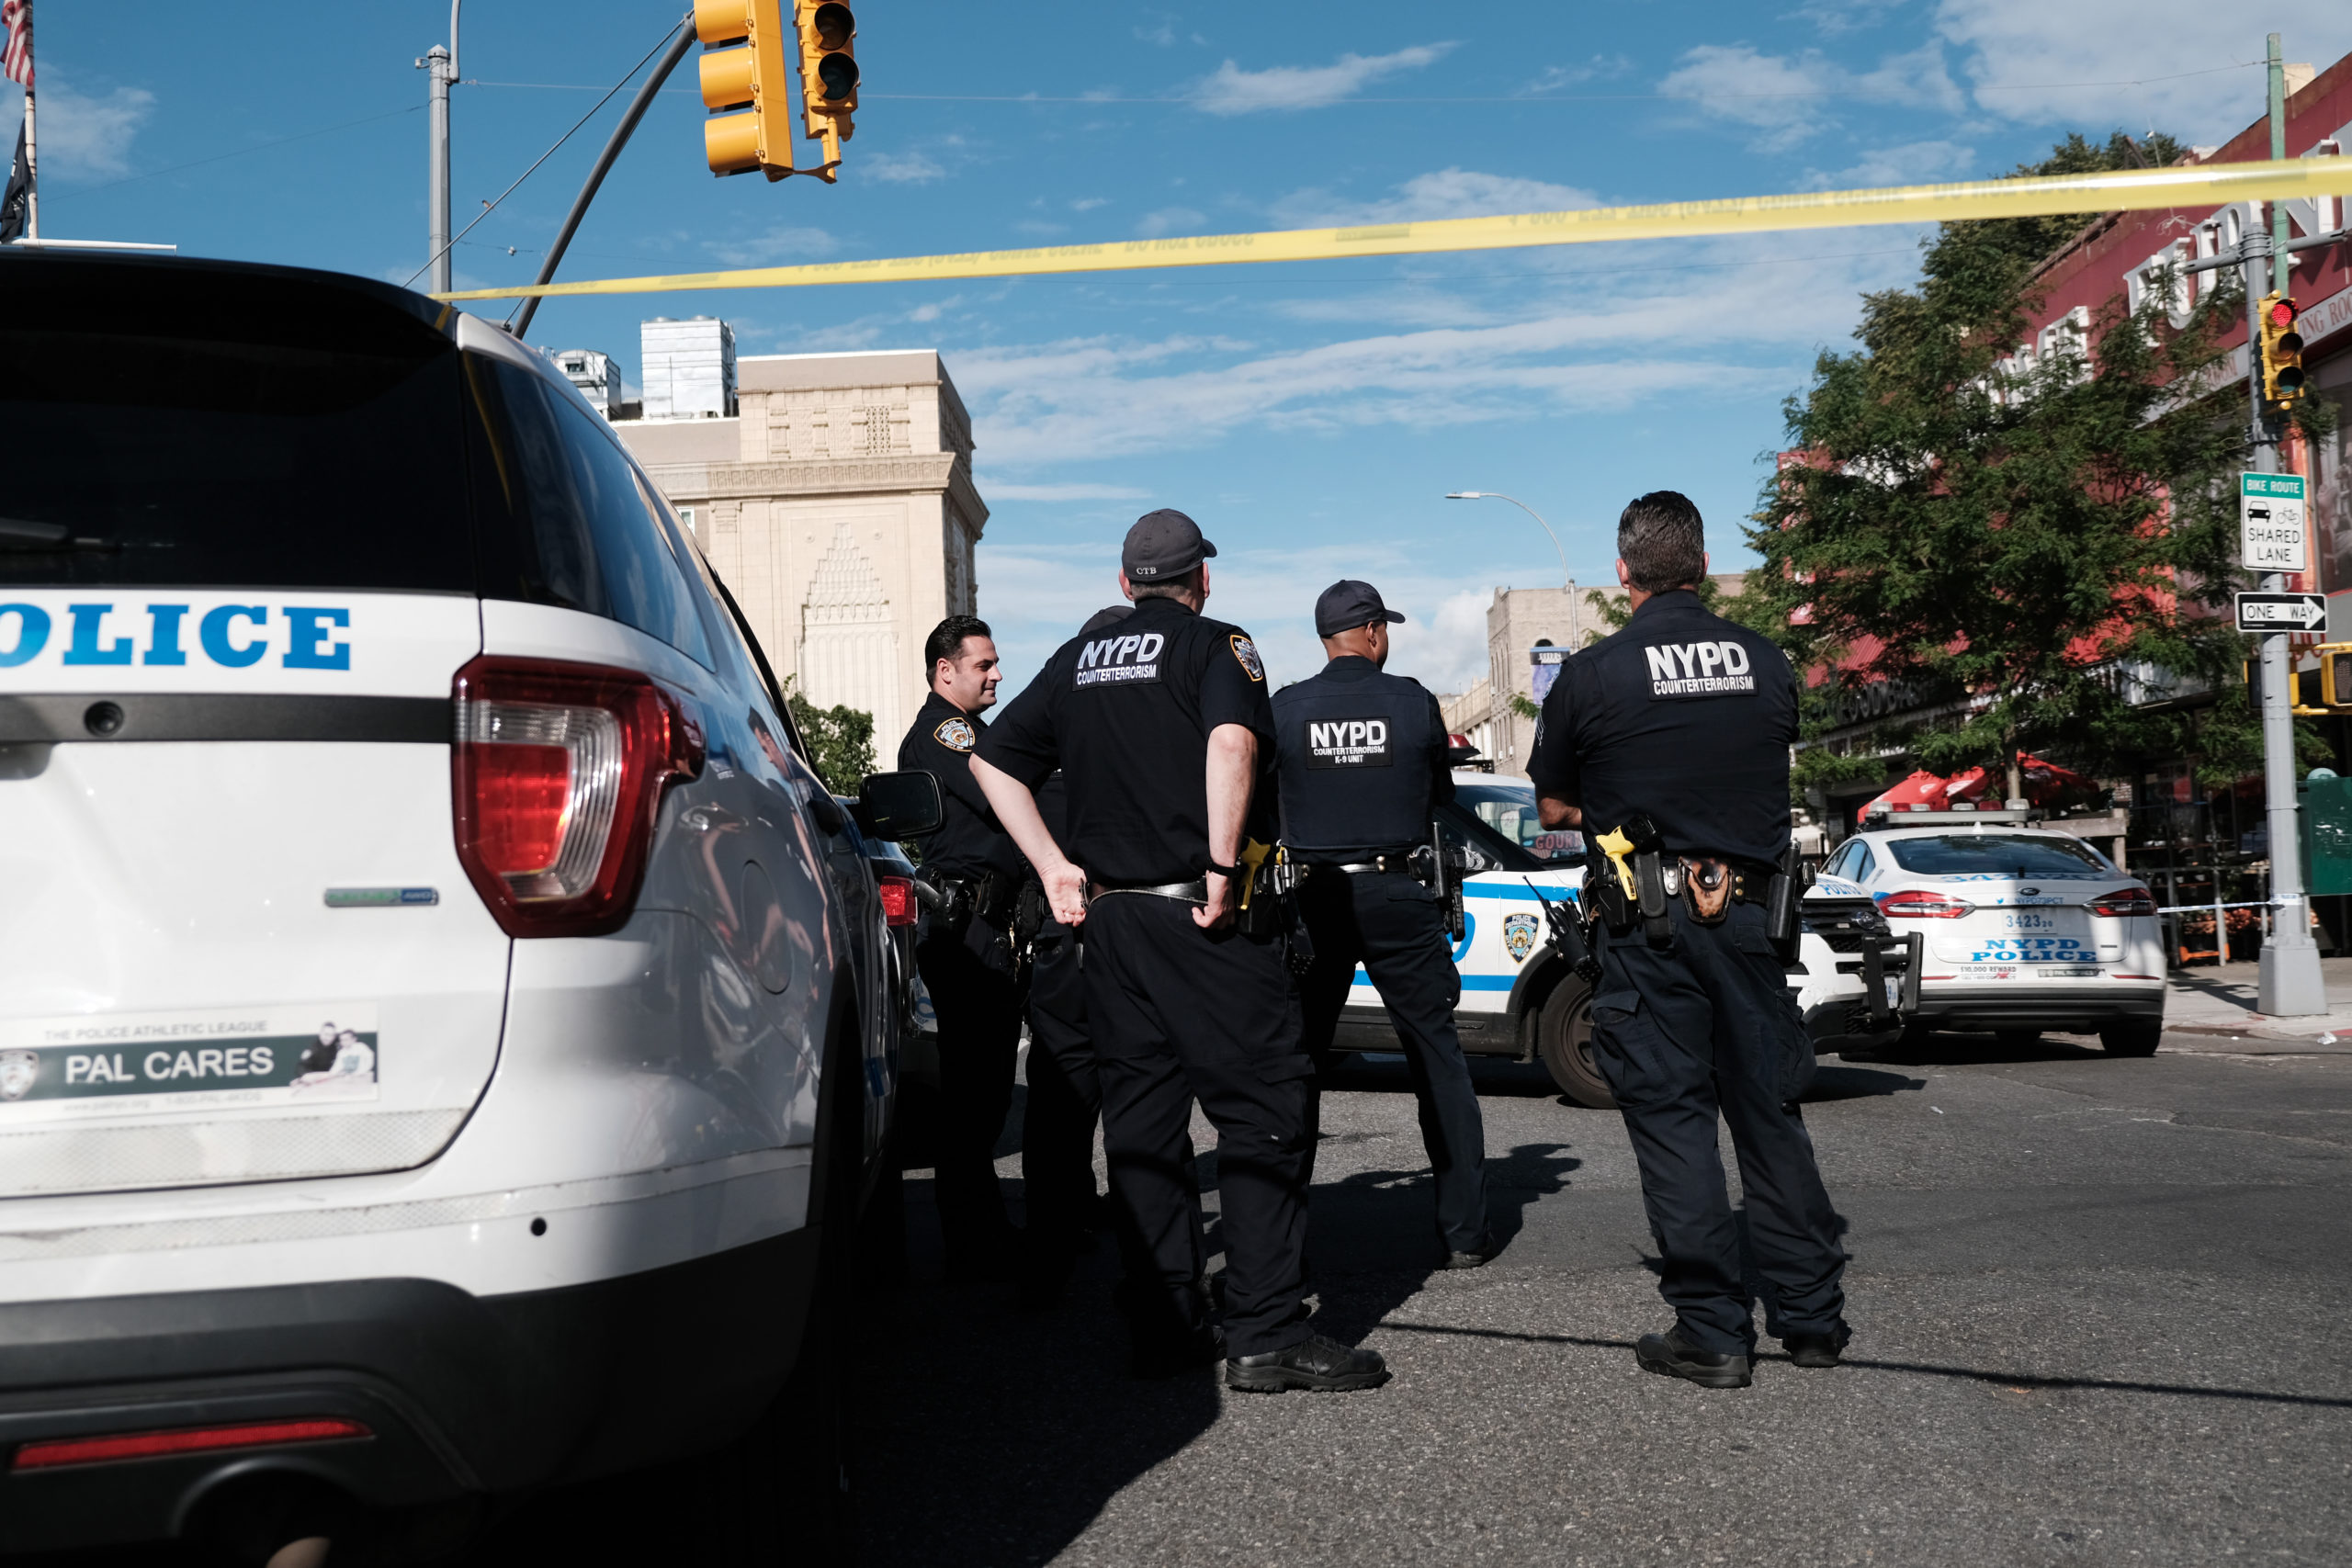 NEW YORK, NEW YORK - JUNE 23: Police gather at the scene of a shooting where an officer was shot in his patrol car in Brooklyn on June 23, 2022 in New York City. The shooting comes on the day that the Supreme Court ruled that New York's laws were too restrictive for individuals wanting a hand gun. (Photo by Spencer Platt/Getty Images)